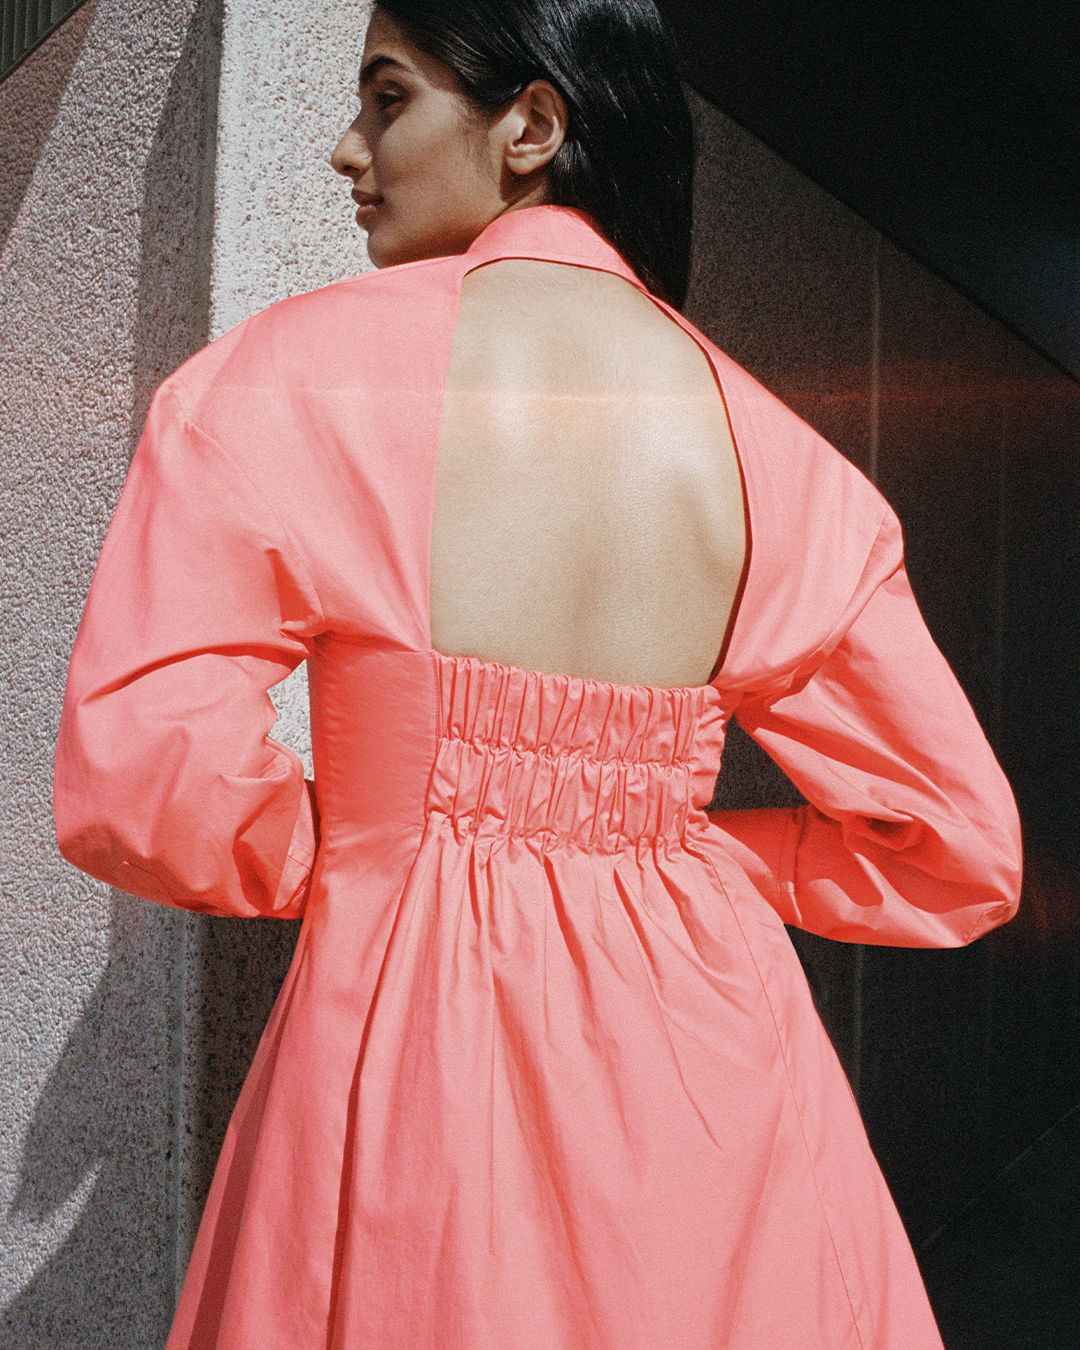 Back shot of girl looking to the side with bent arms crossed in front with open back orange dress.  